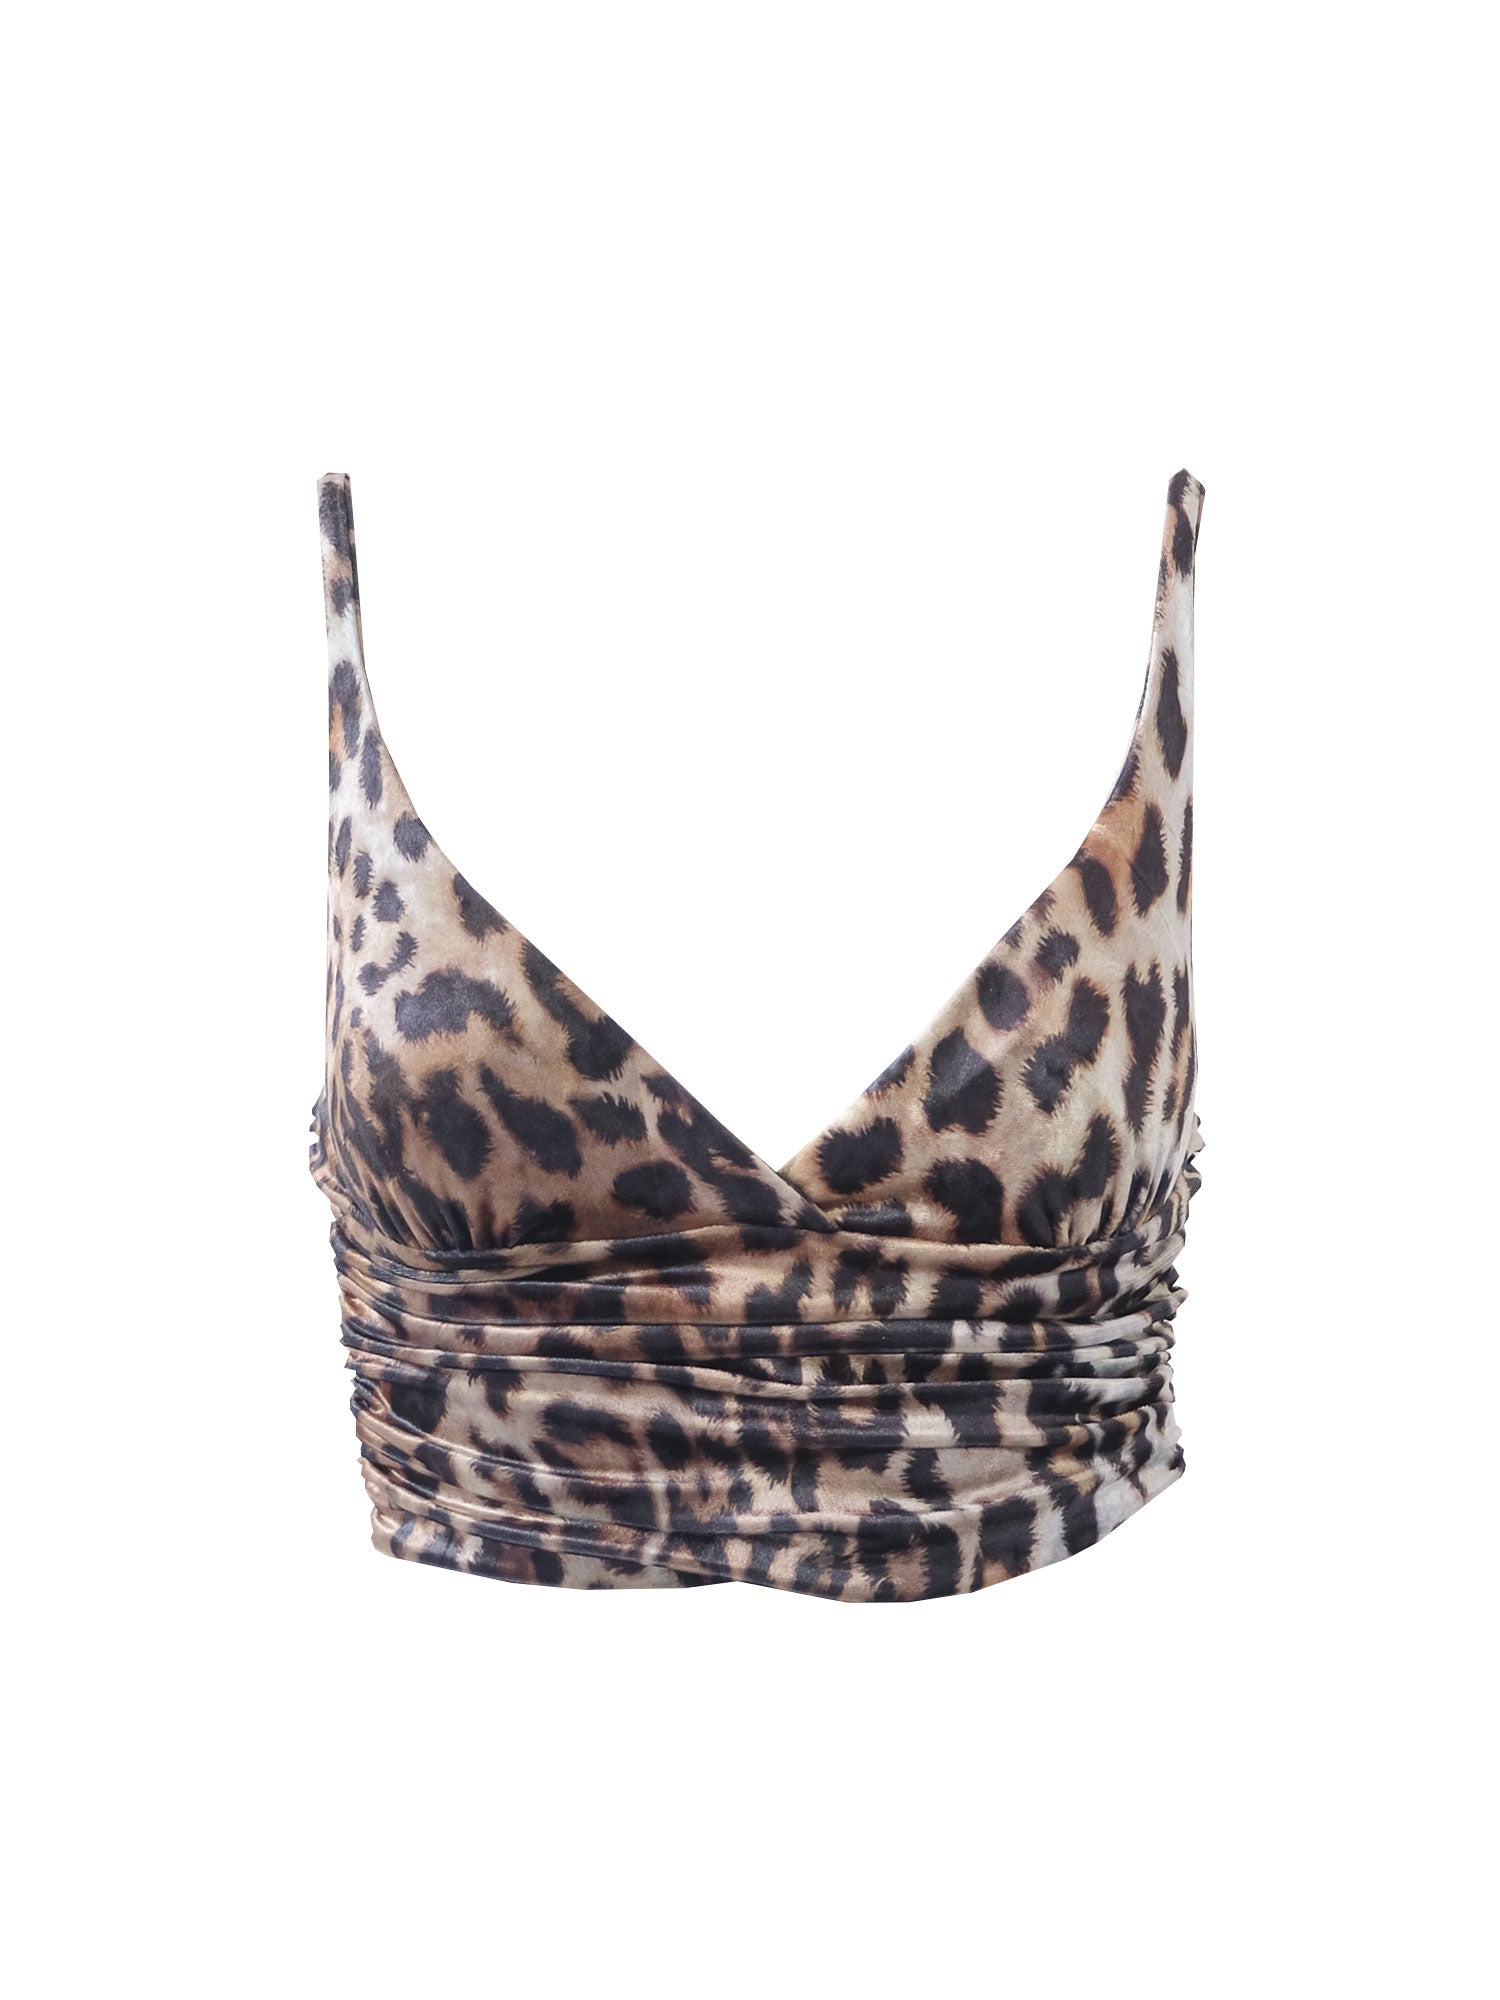 ARIEL - hammered chenille animal print top